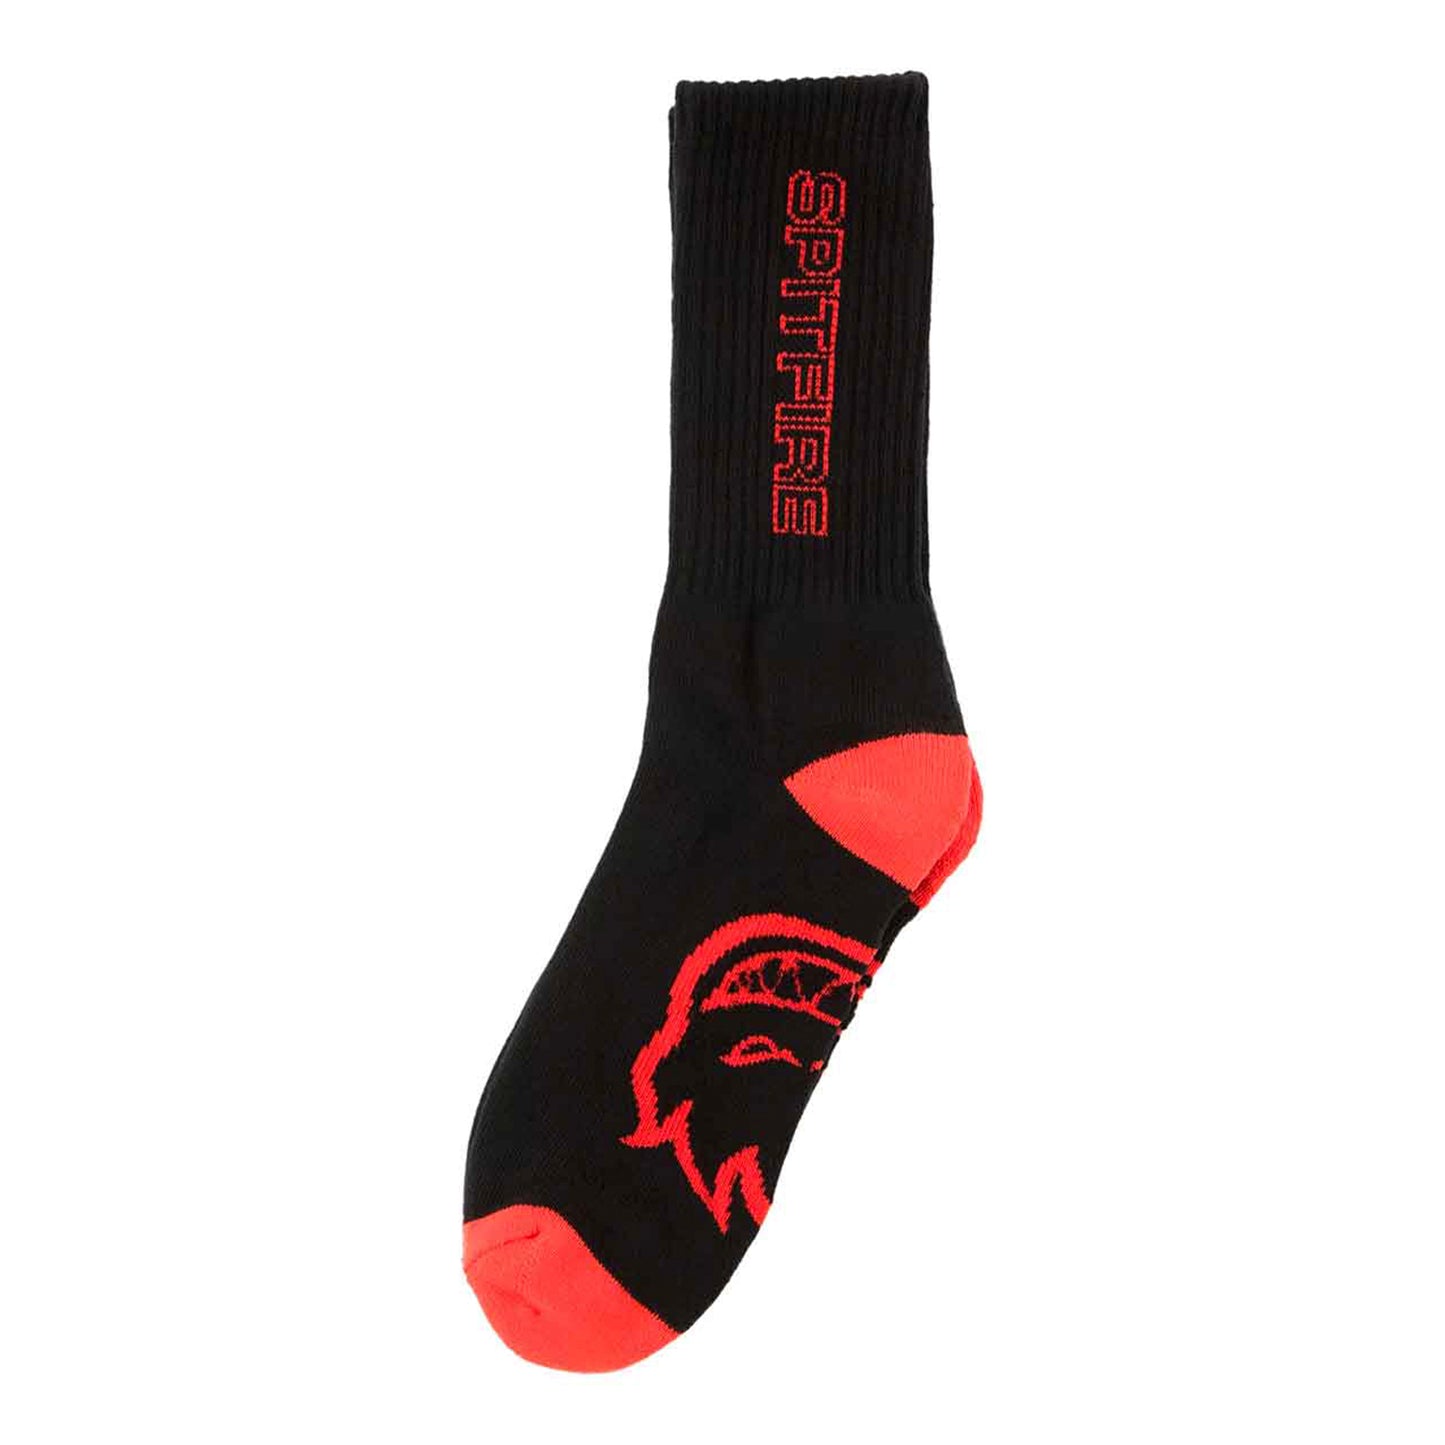 Spitfire Classic 87' Sock 3-Pack - Black / Red - Prime Delux Store